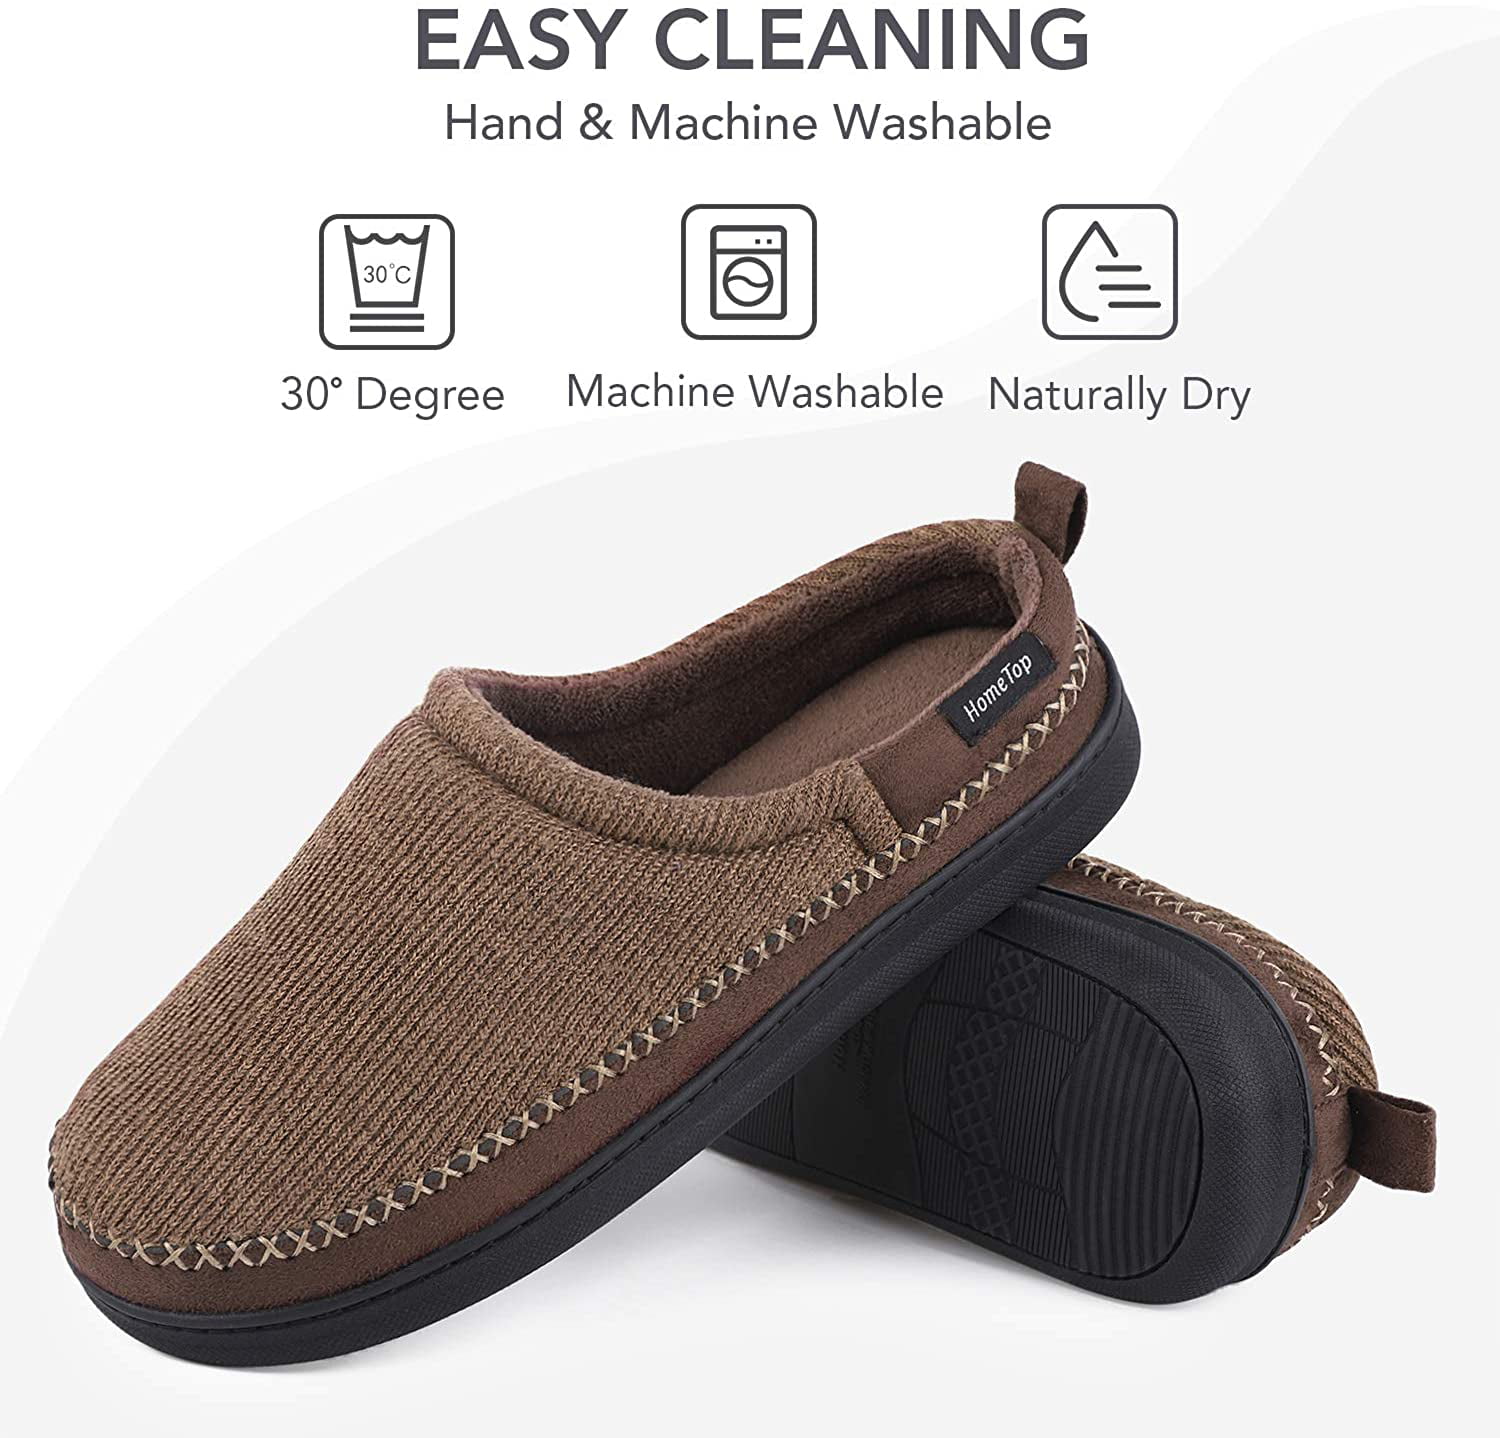 HomeTop Mens Comfy Cotton Knit Terry Lined Slippers with Memory Foam 